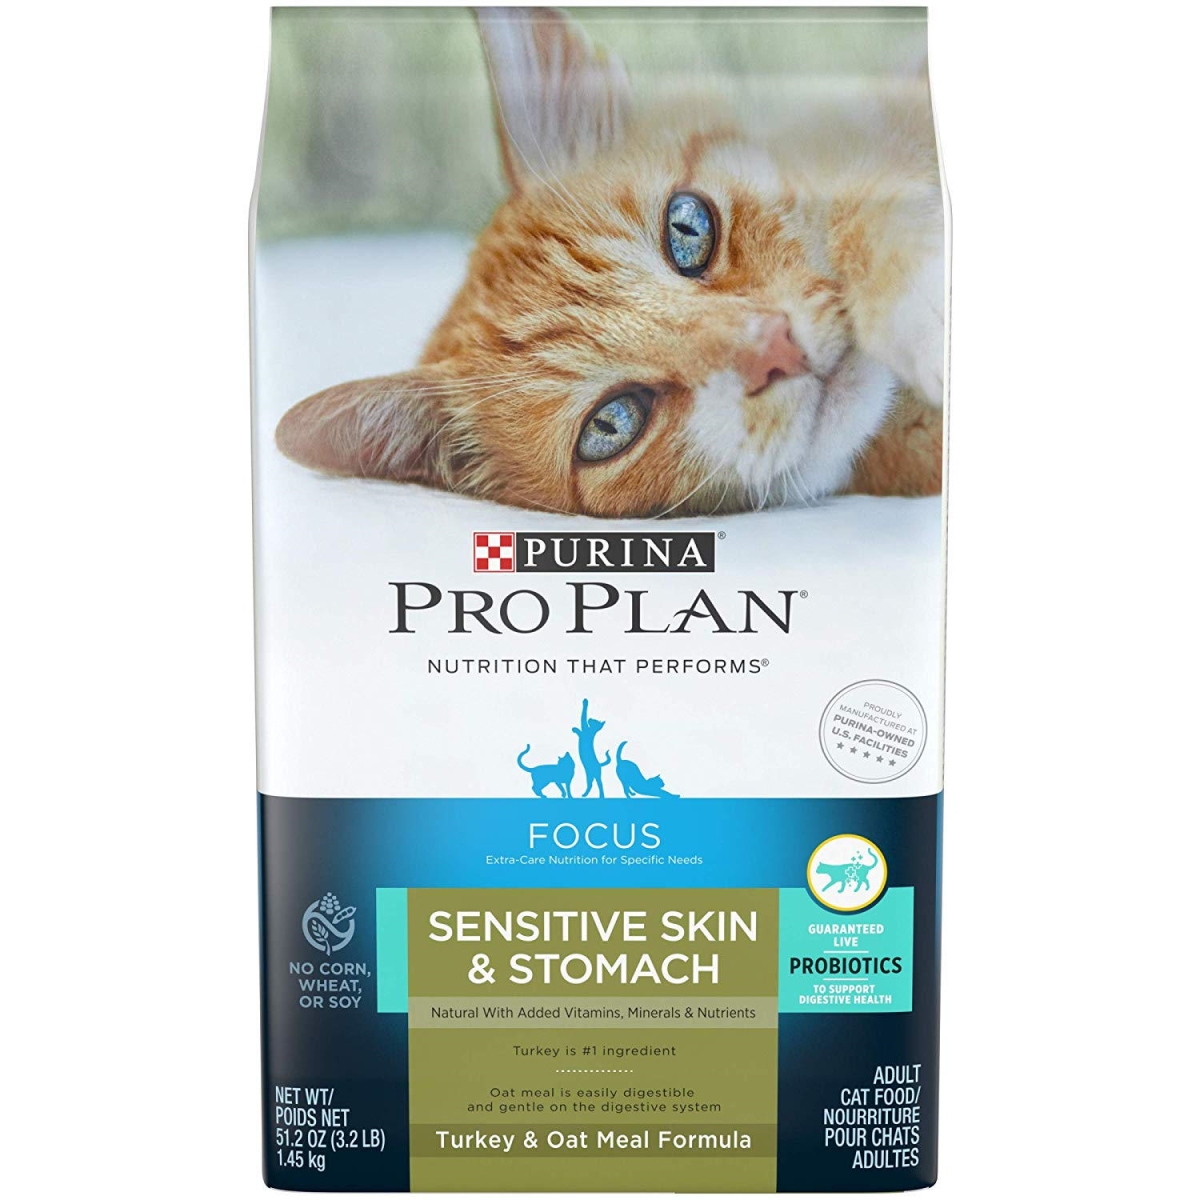 381584 3.2 Lbs Pro Plan Focus Sensitive Skin & Stomach Natural Turkey & Oat Meal Formula Adult Dry Cat Food - Pack Of 6